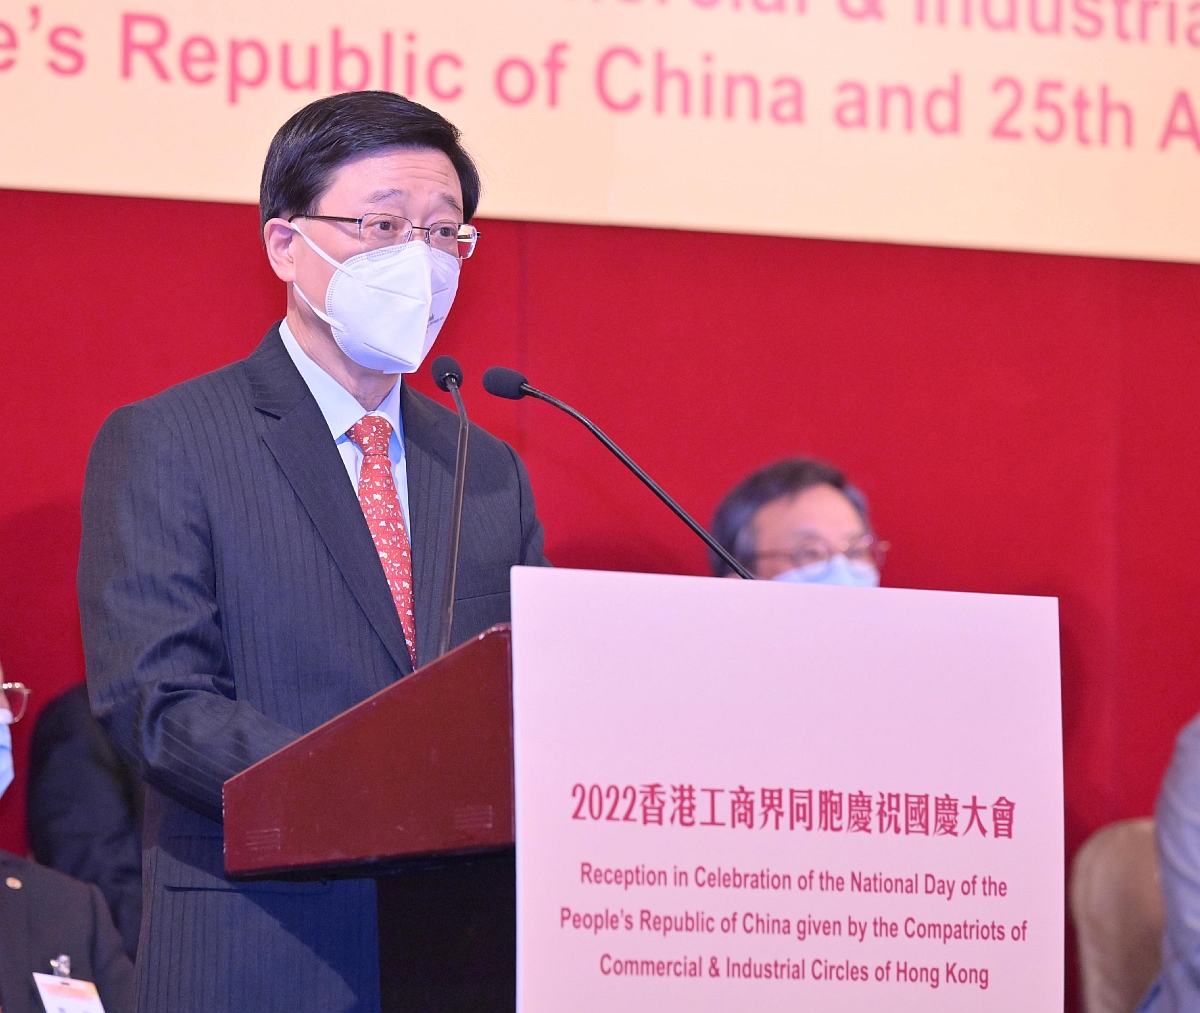 CE attends reception by Compatriots of Commercial and Industrial Circles of Hong Kong - in celebration of 73rd National Day of People's Republic of China and 25th anniversary of establishment of Hong Kong Special Administrative Region